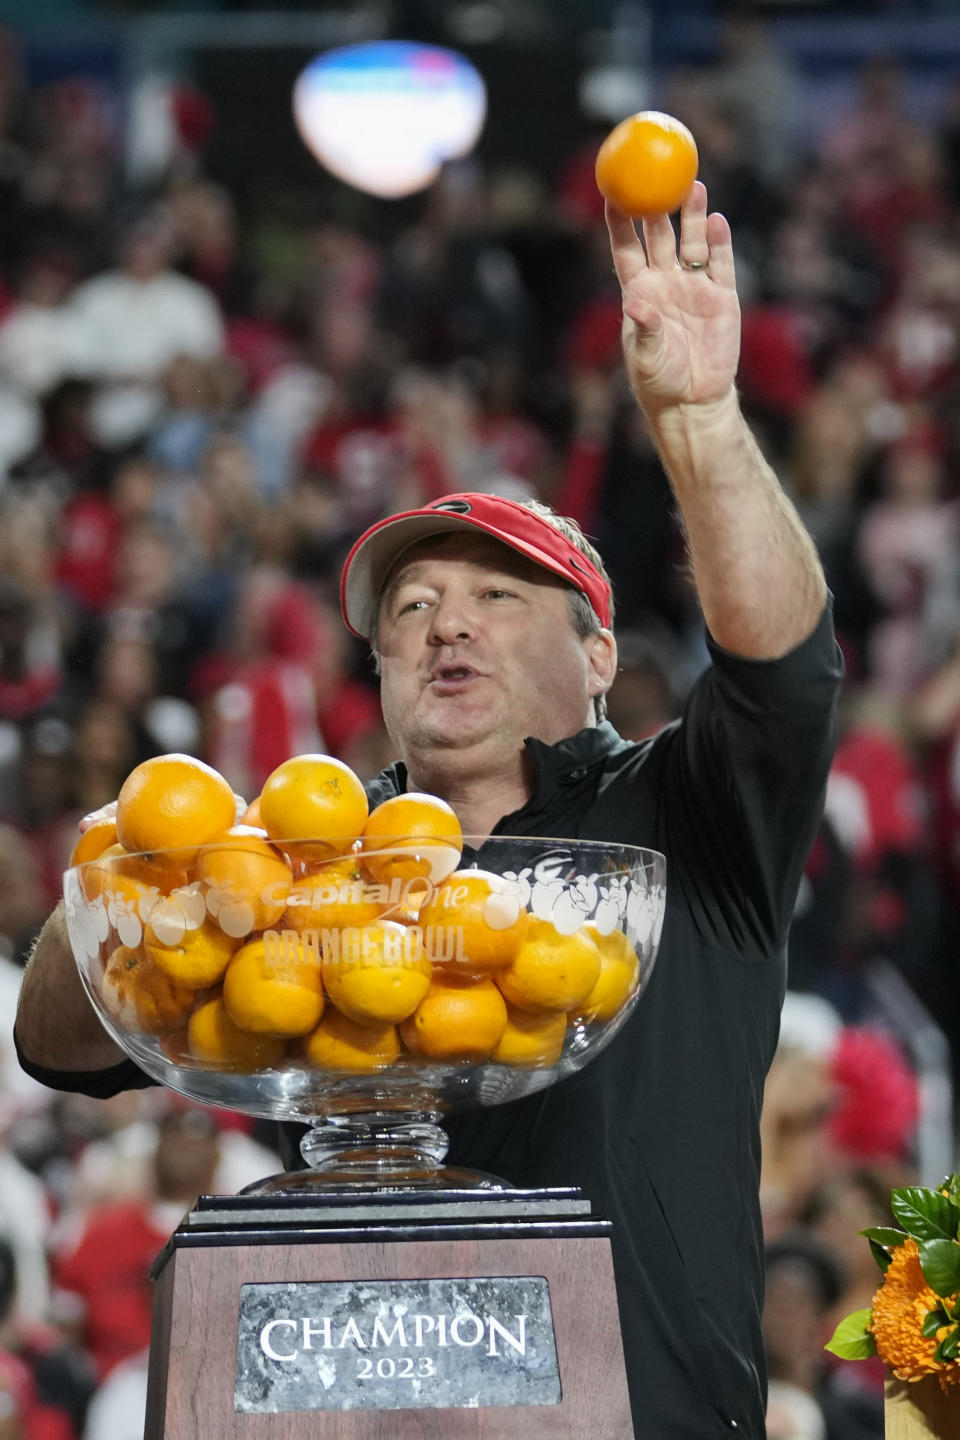 Georgia head coach Kirby Smart tosses oranges from the trophy after Georgia defeated Florida State in the second half of the Orange Bowl NCAA college football game, Saturday, Dec. 30, 2023, in Miami Gardens, Fla. (AP Photo/Rebecca Blackwell)